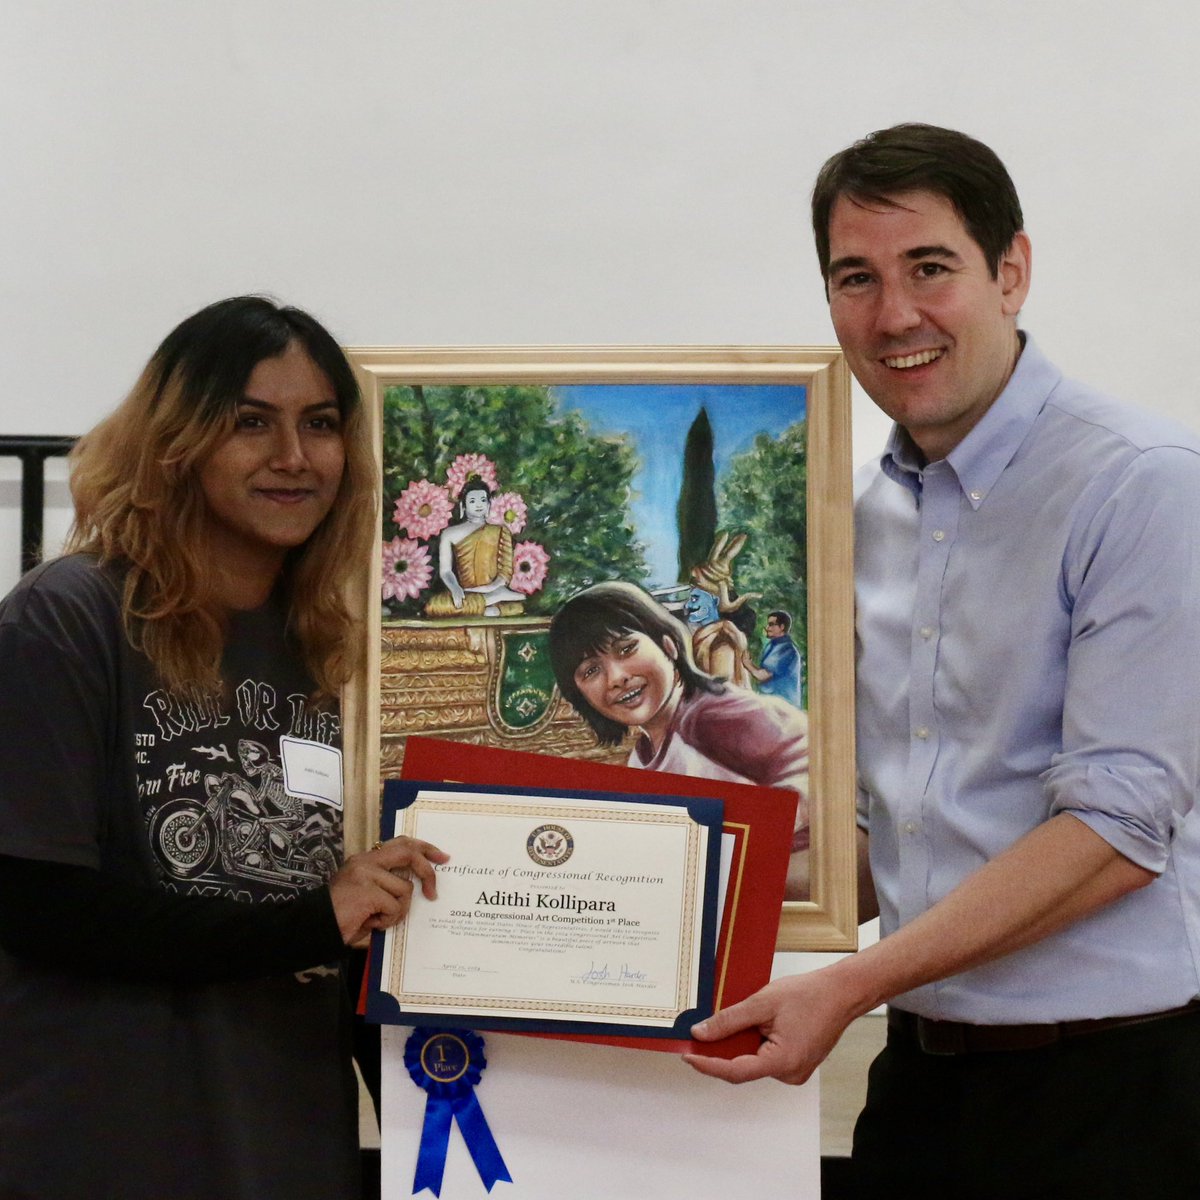 Congrats to our first place winner in the Congressional Art Competition! Adithi is from Mountain House and will have her art displayed in the United States Capitol for the next year.